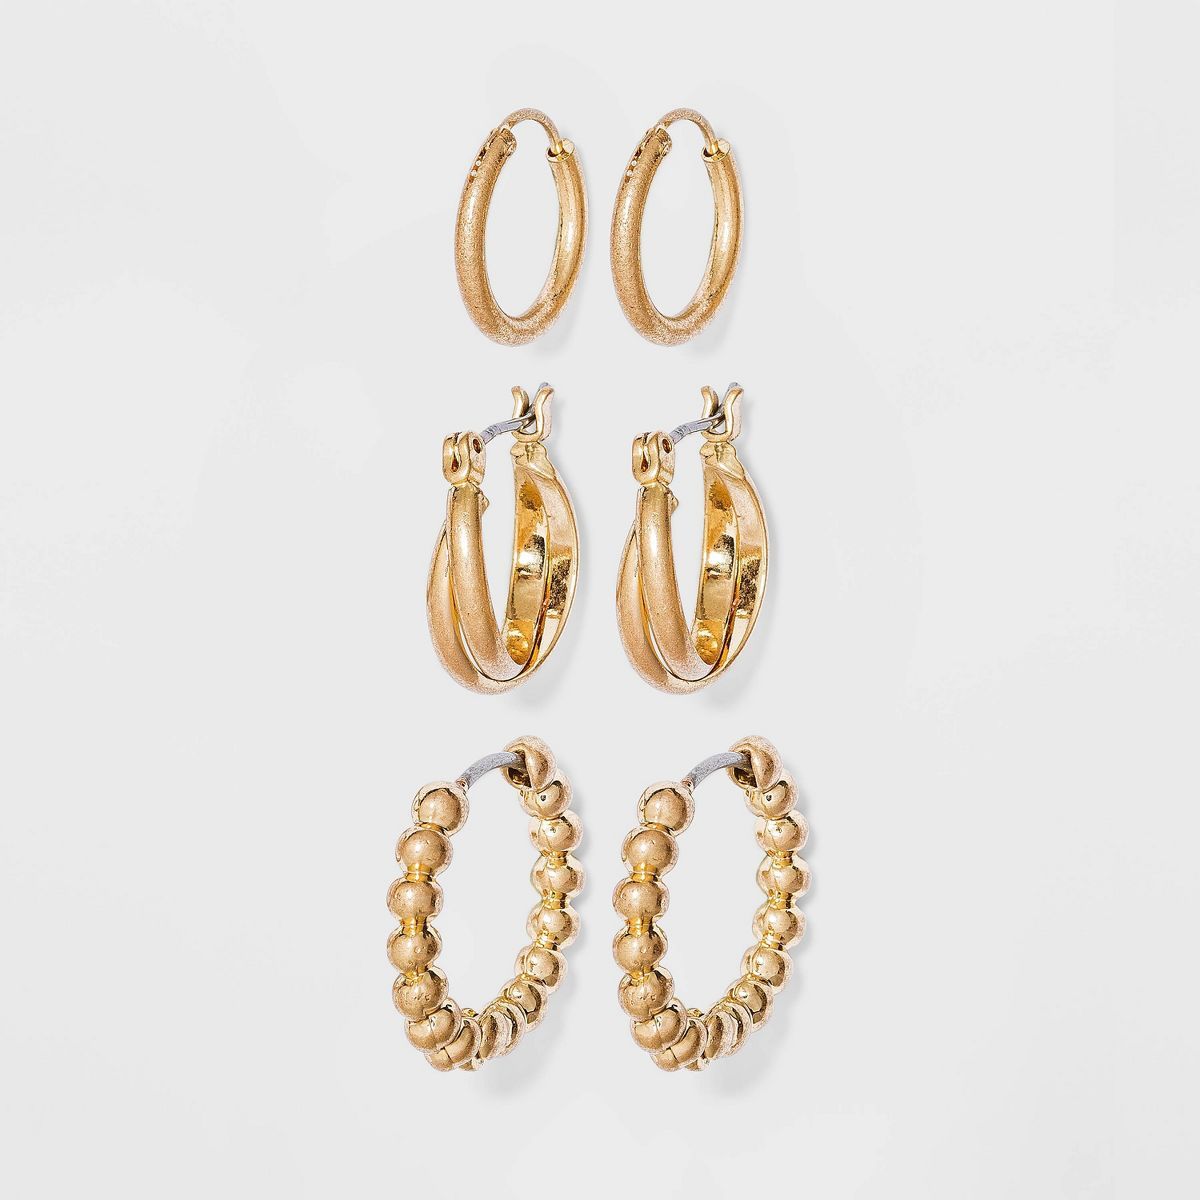 Bead and Twister Hoop Earring Set 3pc - Universal Thread™ Gold | Target